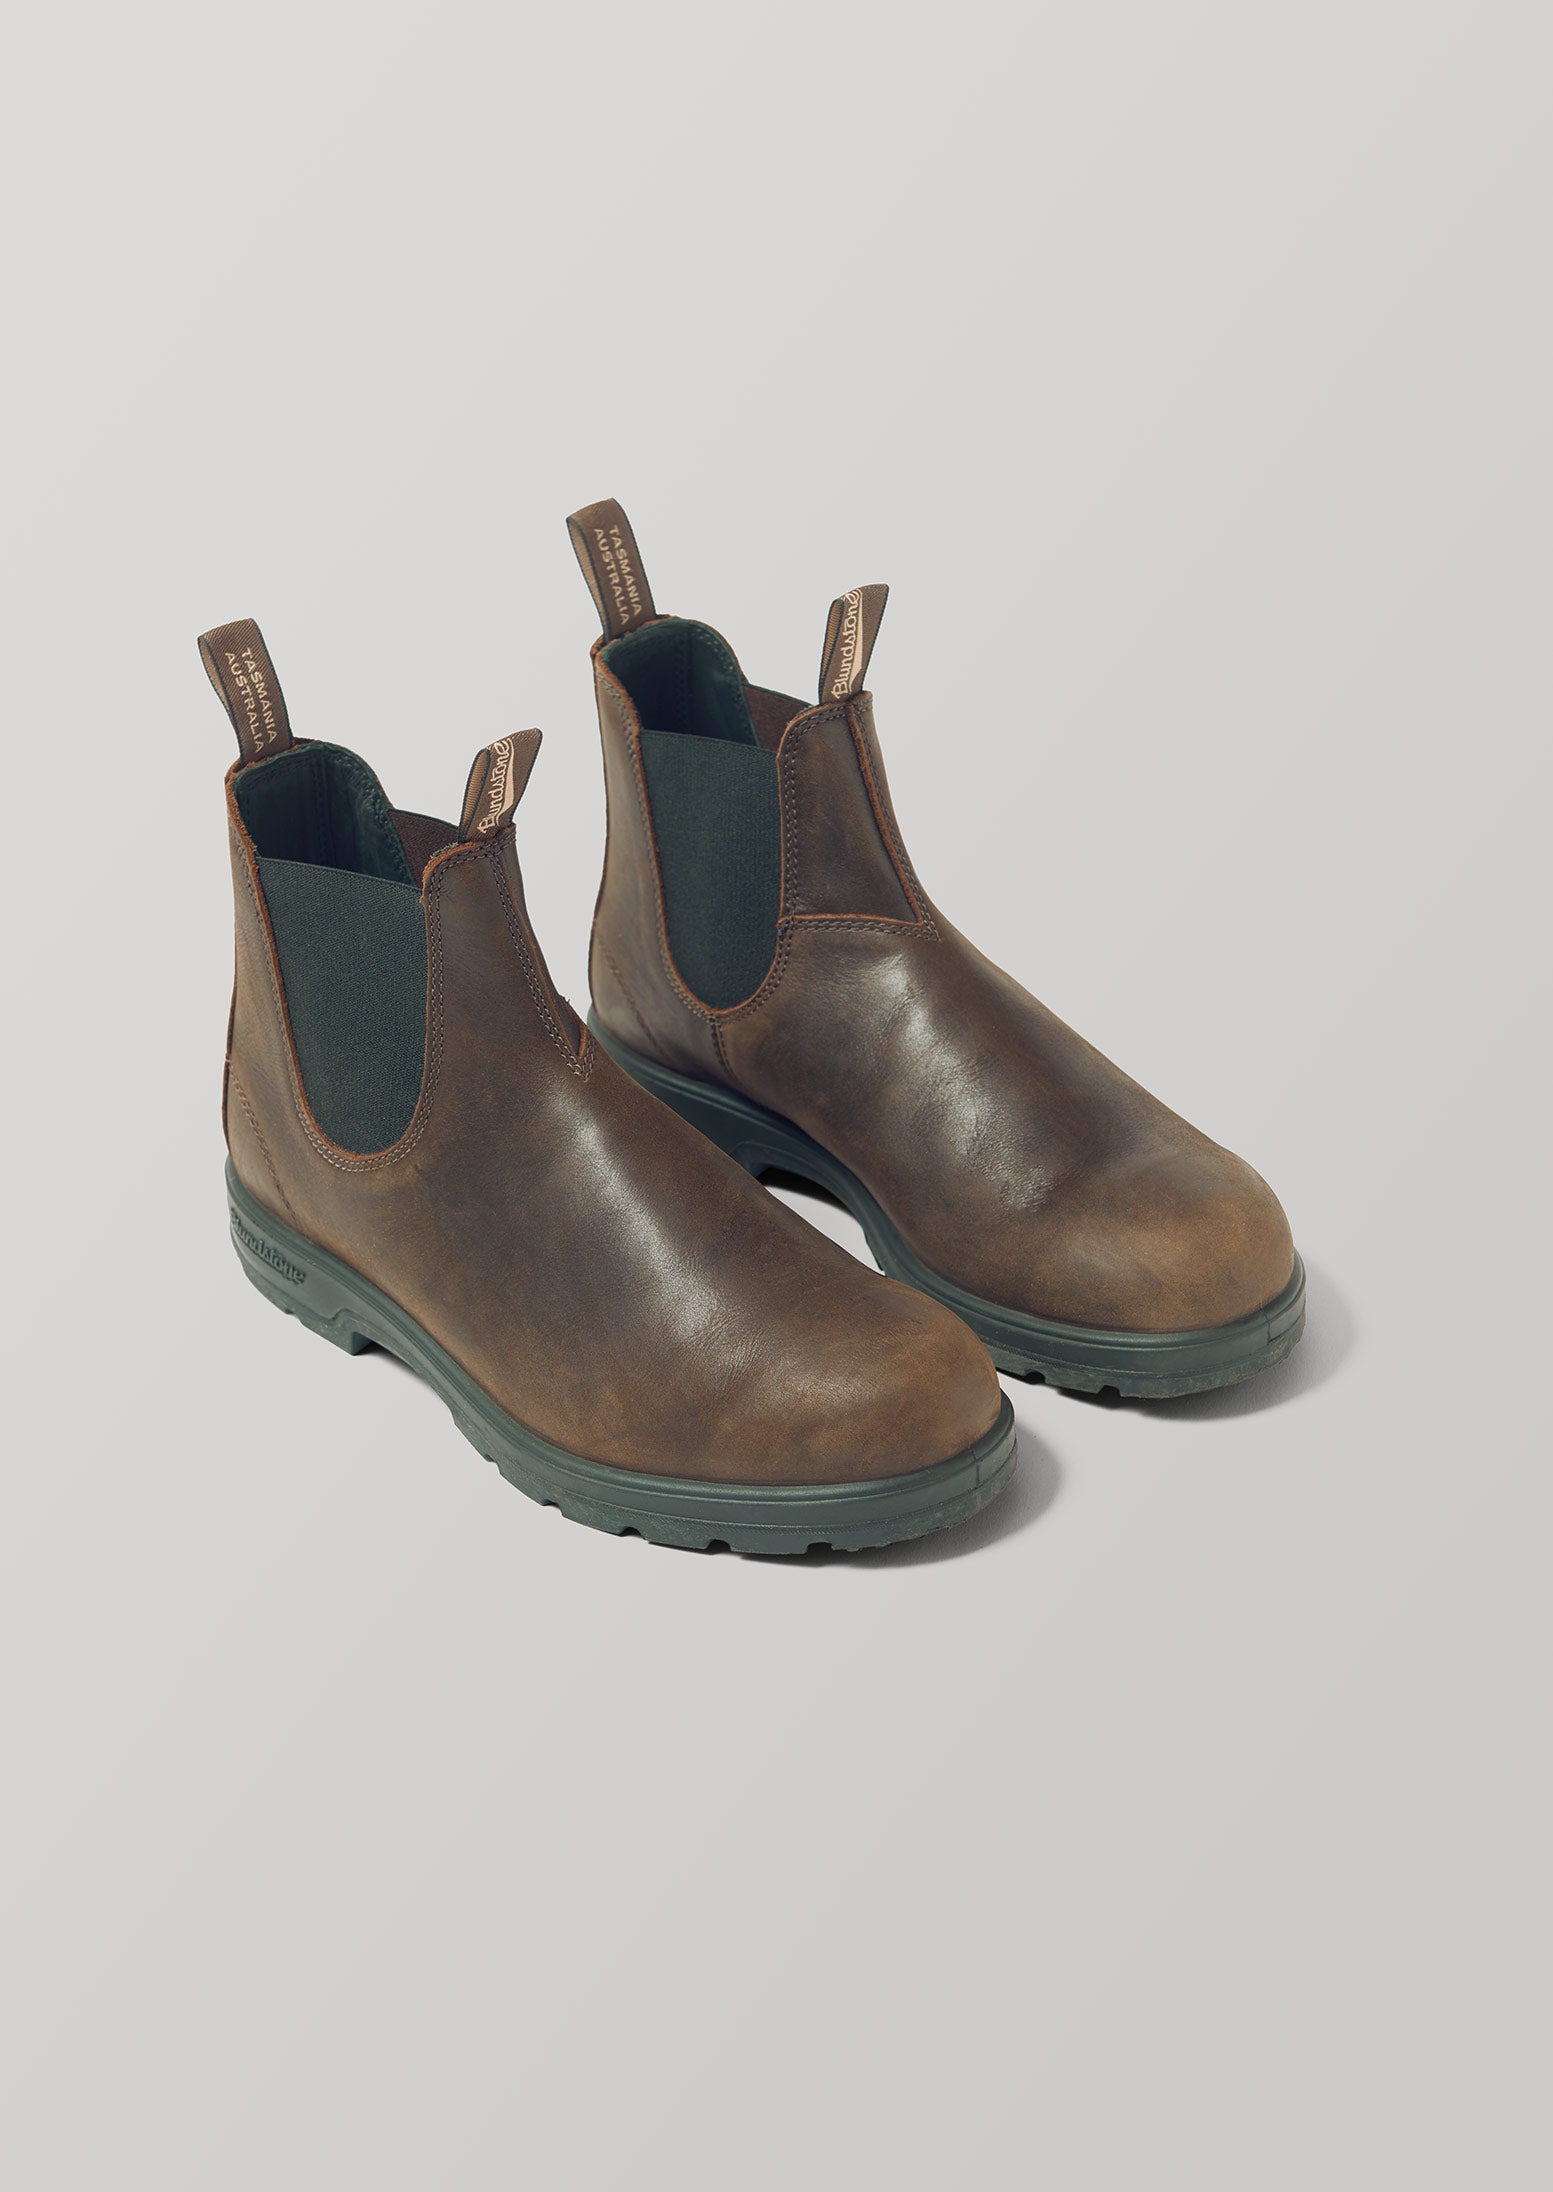 Do Blundstone Boots Ever Go on Sale?